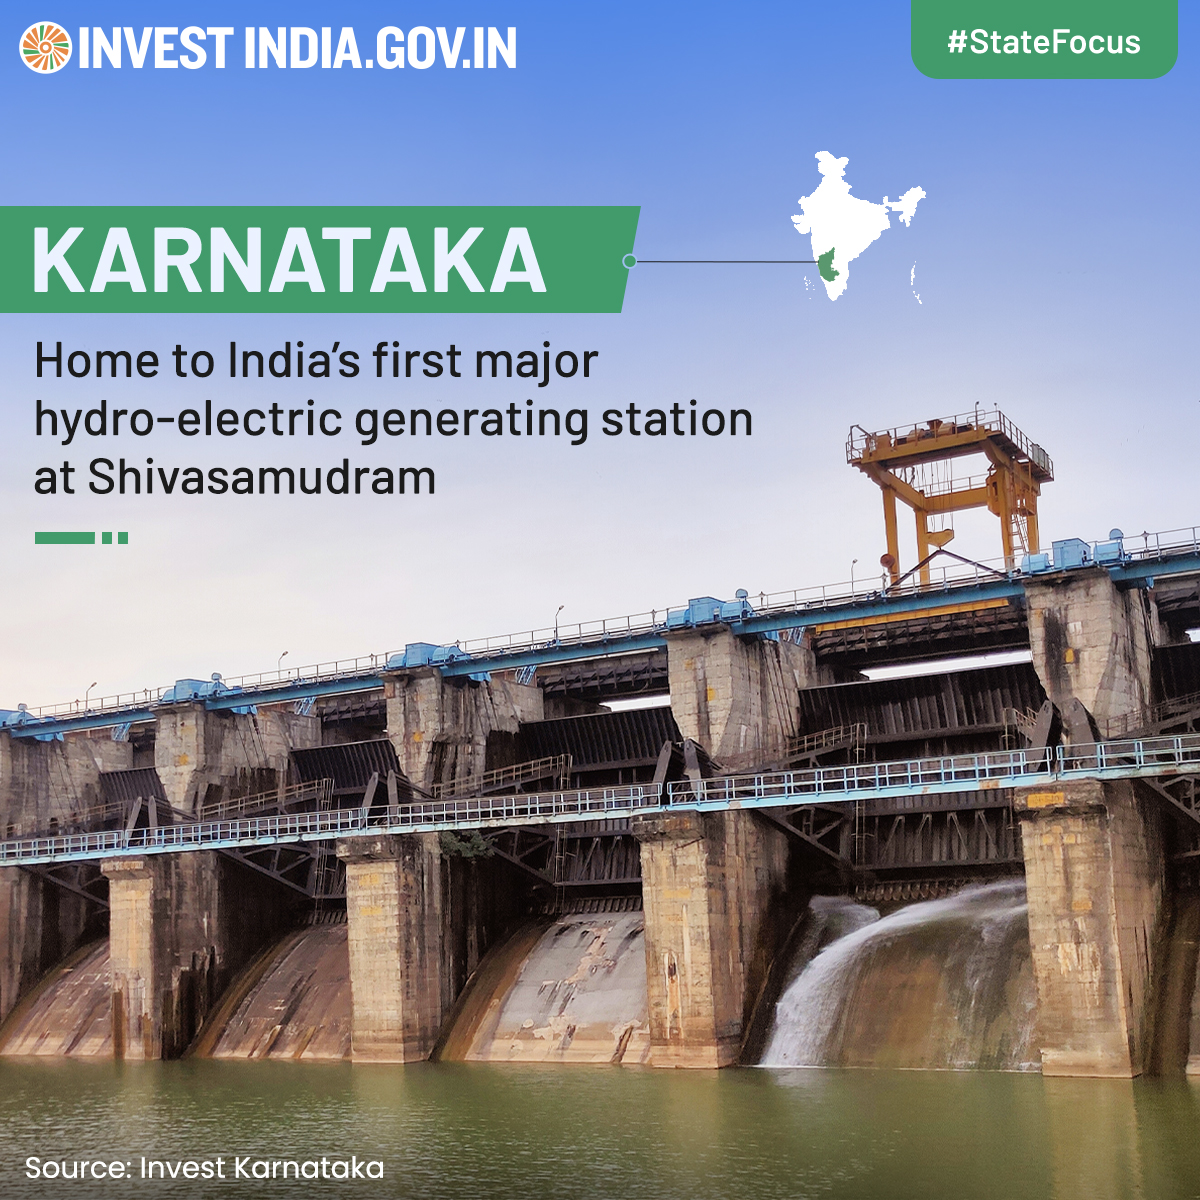 #Karnataka stands at the forefront of #solarenergy production, backed by a robust ecosystem of 400+ #renewableenergy companies, resulting in significant #cleanenergy generation. Discover more at: bit.ly/II-Karnataka #StateFocus @CMofKarnataka @mnreindia @OfficeOfRKSingh